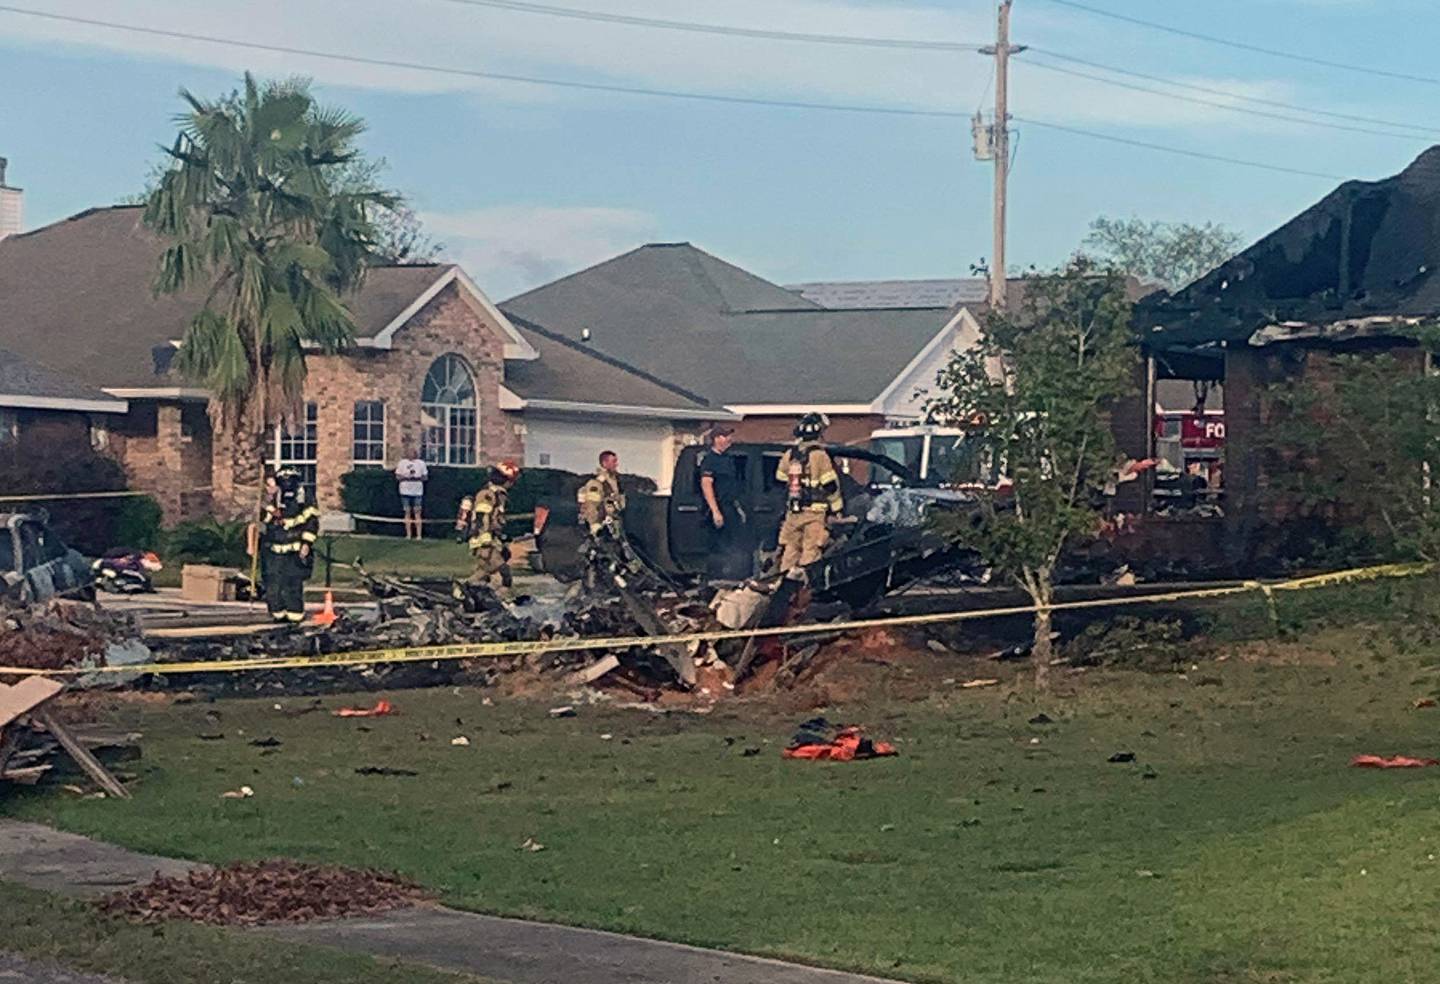 This photo provided by Greg Crippen shows the scene where a U.S. Navy training plane crashed in an Alabama residential neighborhood near the Gulf Coast, Friday, Oct. 23, 2020 near Foley, Ala.